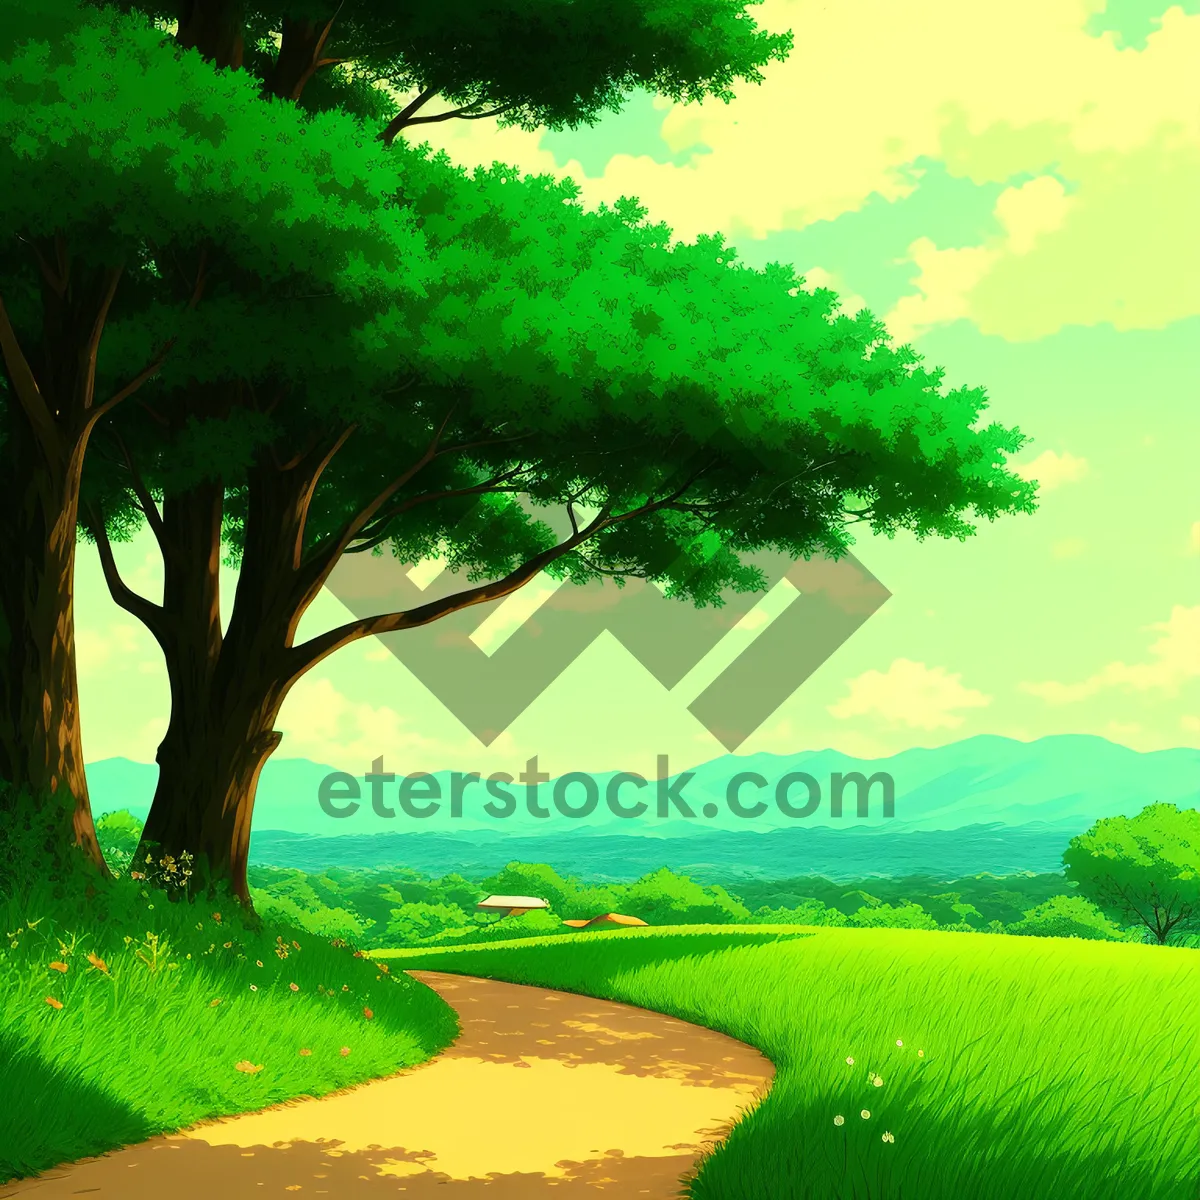 Picture of Serene Golf Course with Lush Green Landscape